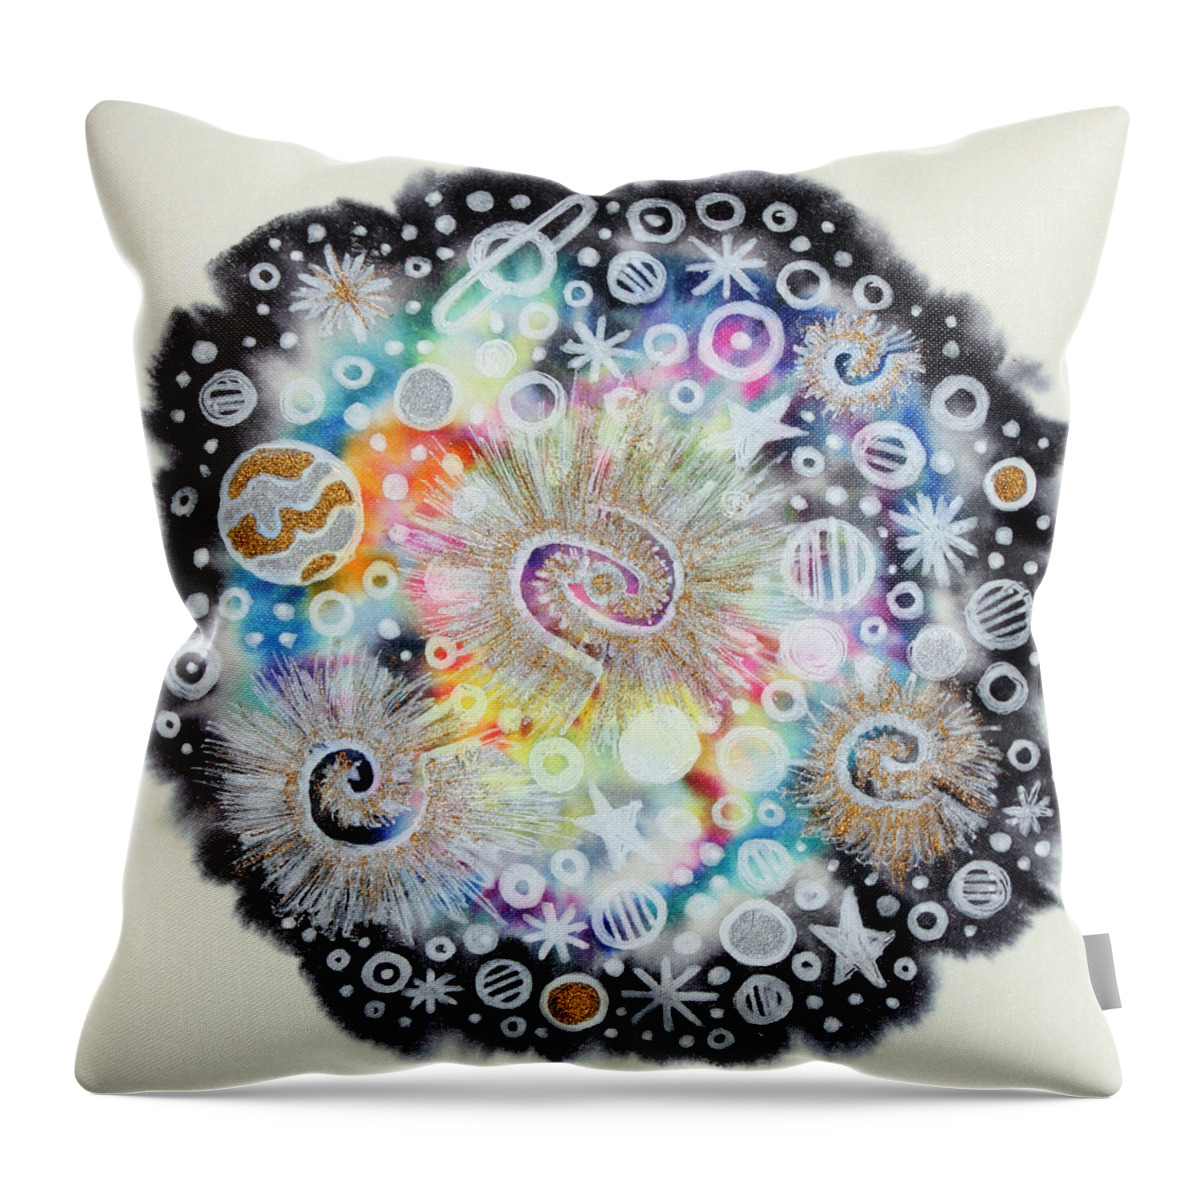 Space Cosmos Universe Galaxy Nebula Planets Comets Asteroids Ufos Shooting Stars Spirals Swirls Meteors Throw Pillow featuring the photograph No.7 by Daniel Icaza